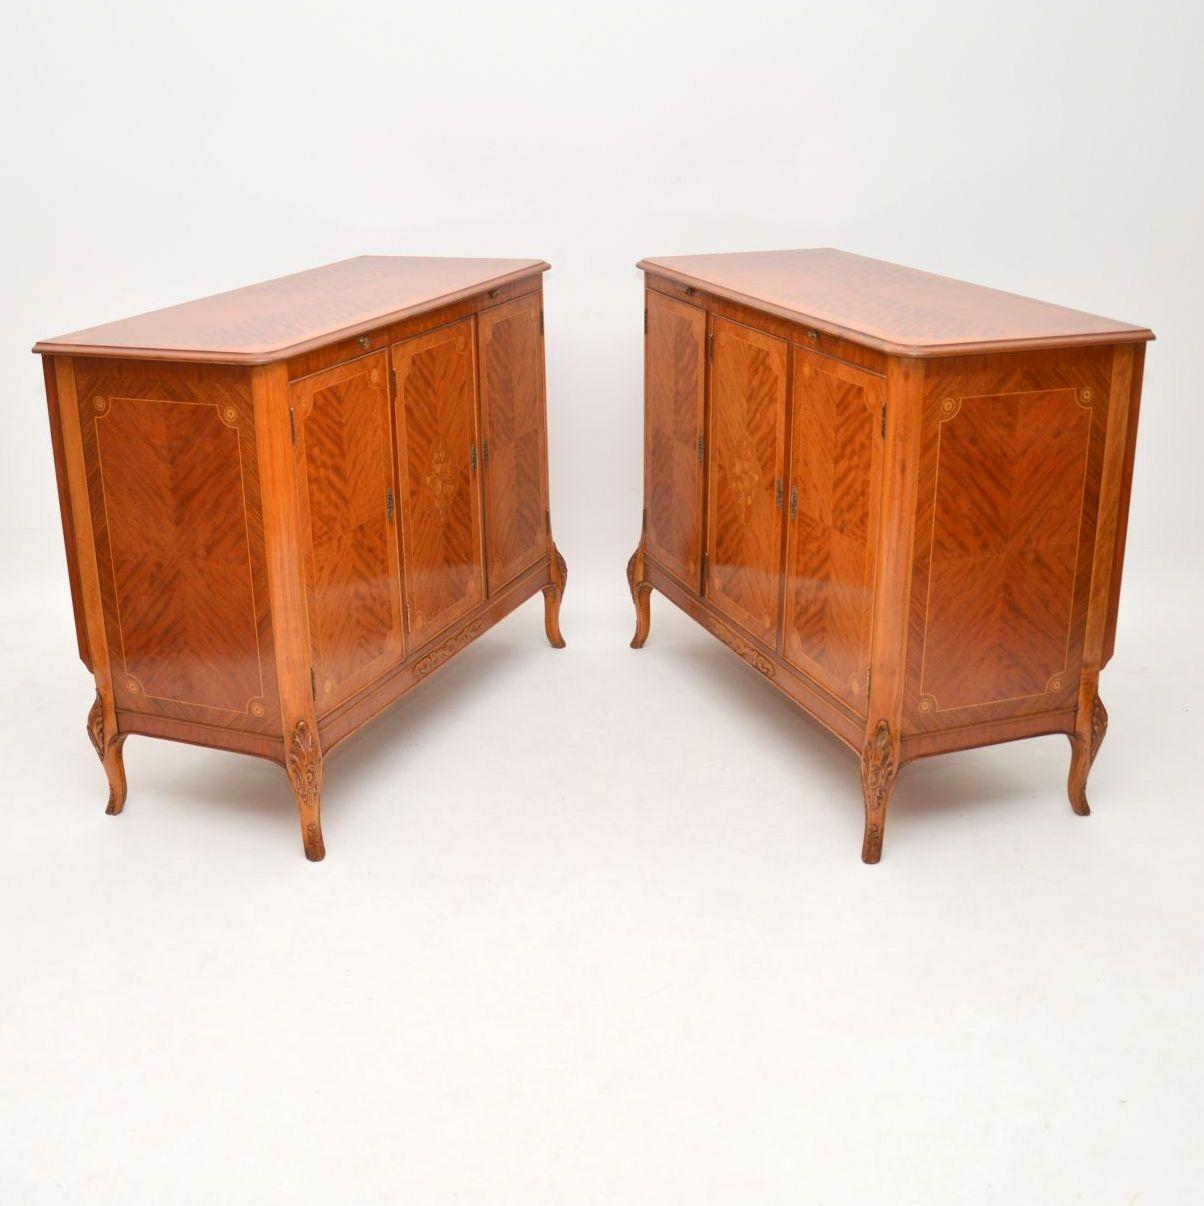 Pair of Antique French Style Inlaid King Wood Cabinets 5